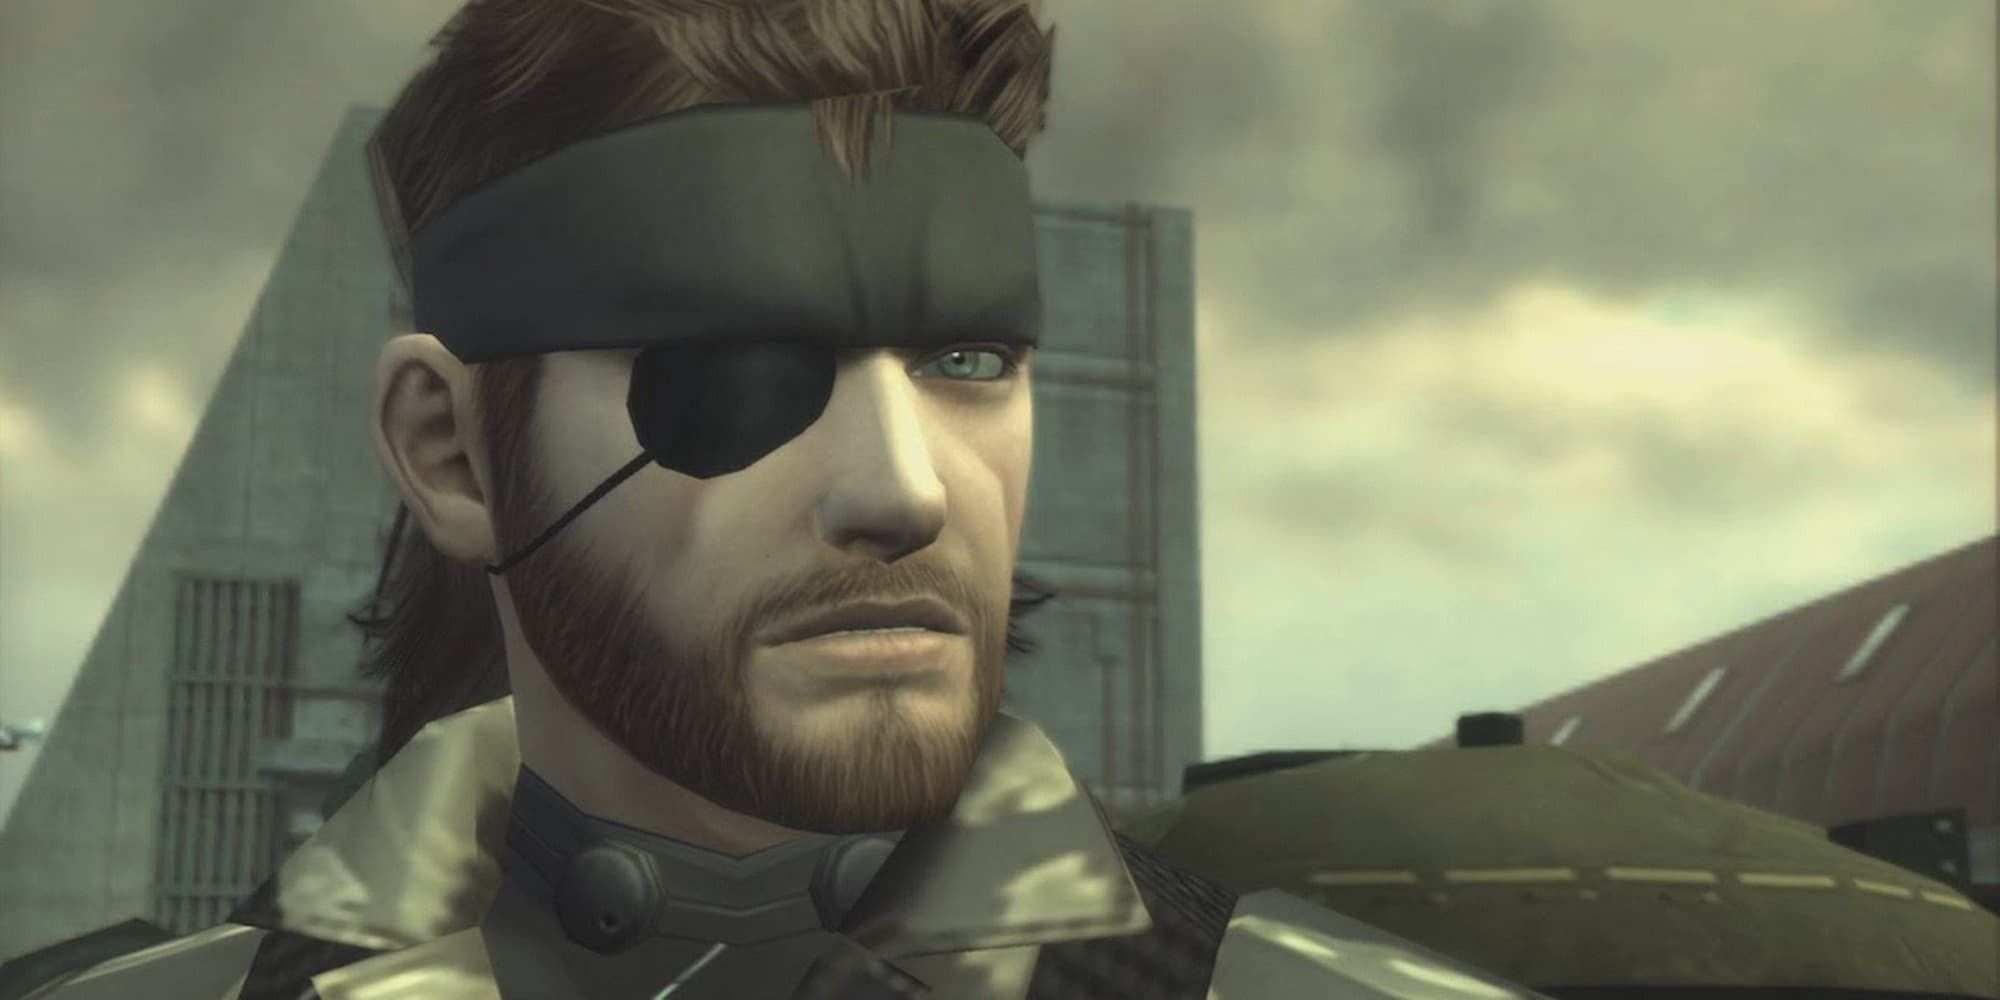 Big Boss as Naked Snake in MGS 3